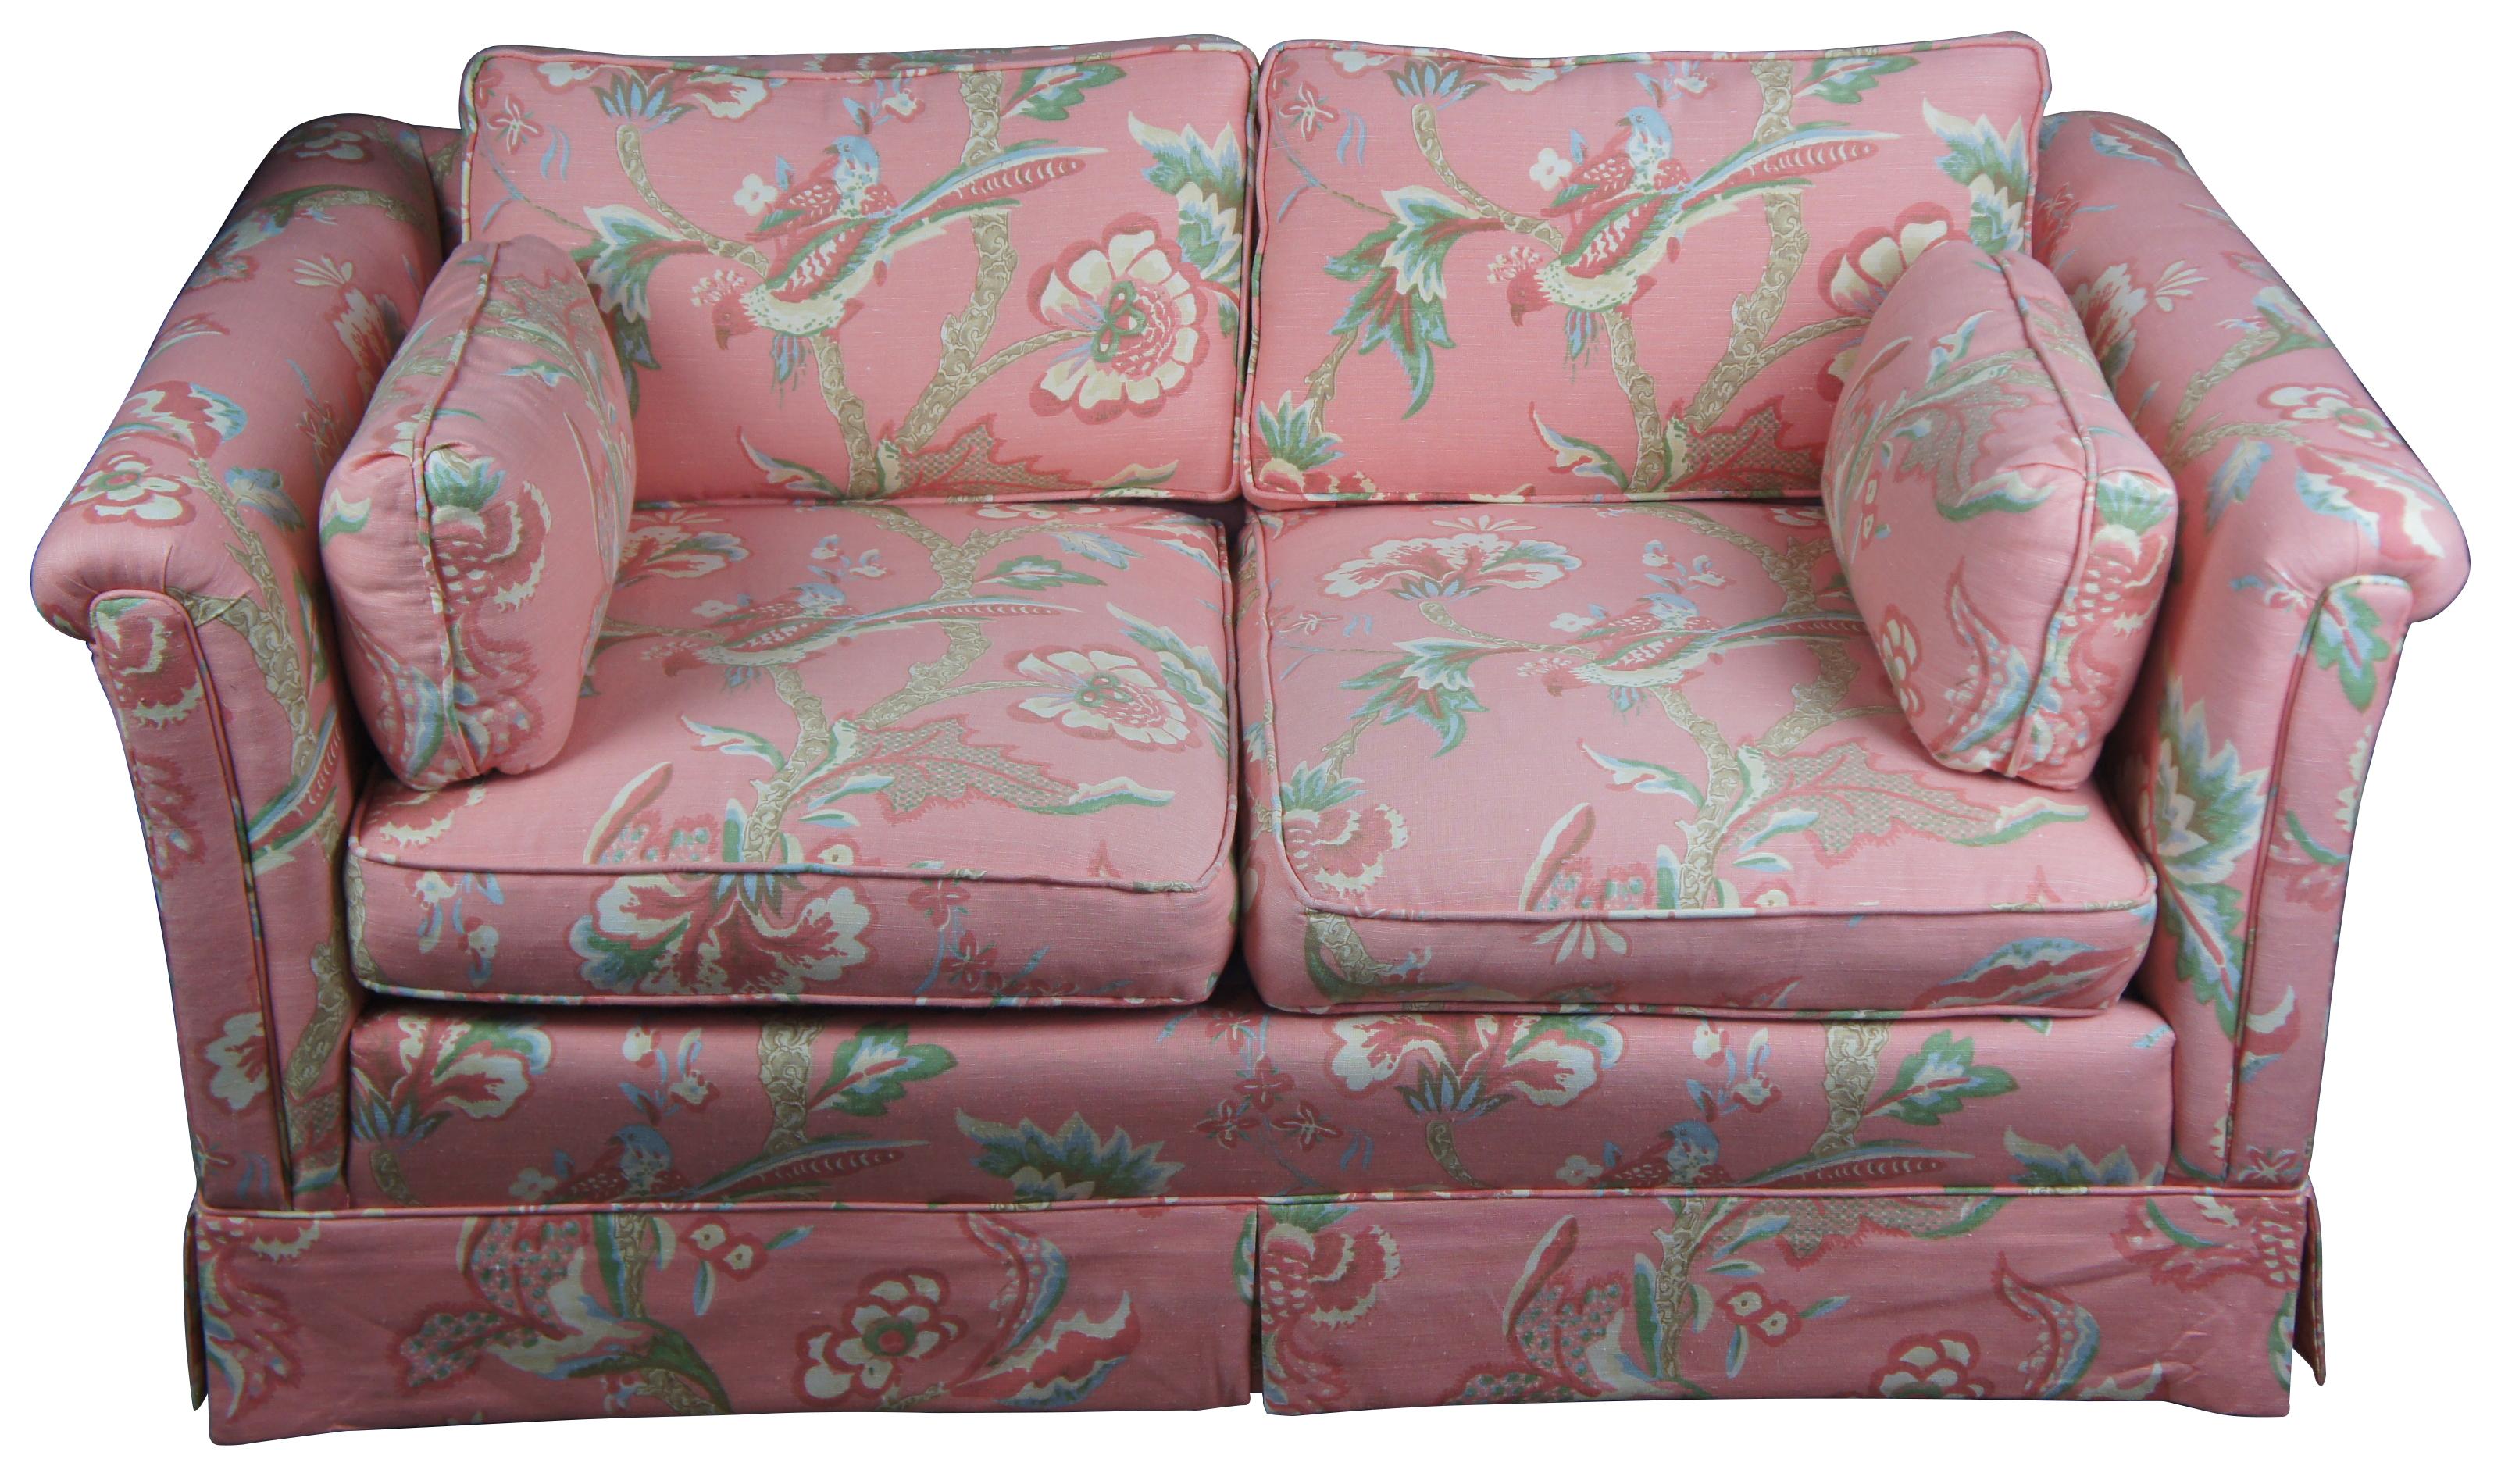 Quant loveseat or sofa, circa 1970s. Features a pink tropical bird fabric with bolster pillows and arm covers. Measures: 60”.
 